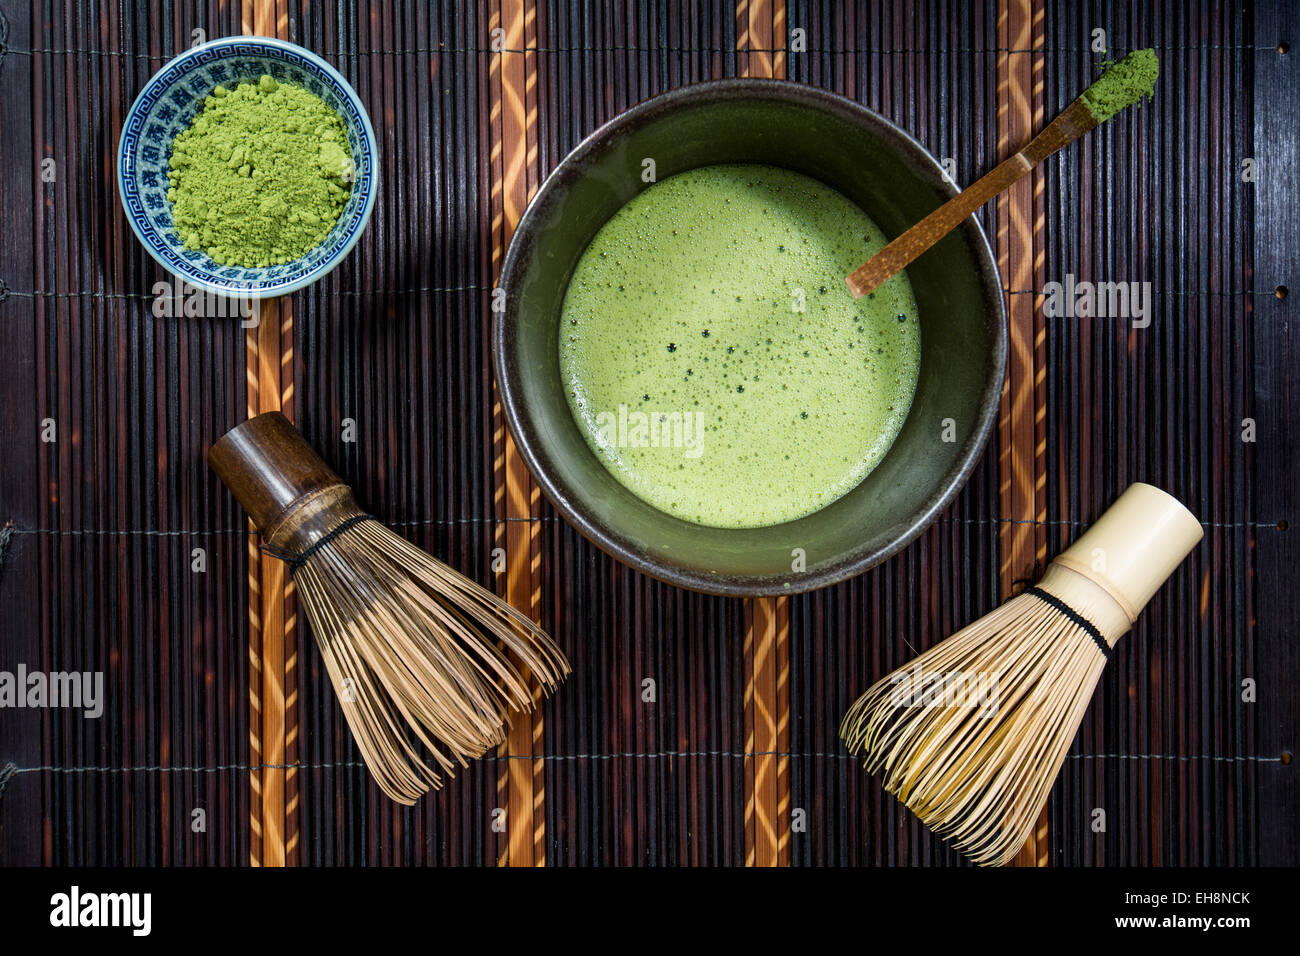 Bowl of Matcha with a Chasen a Chashaku and a bowl of Matcha powder on a place mat Stock Photo